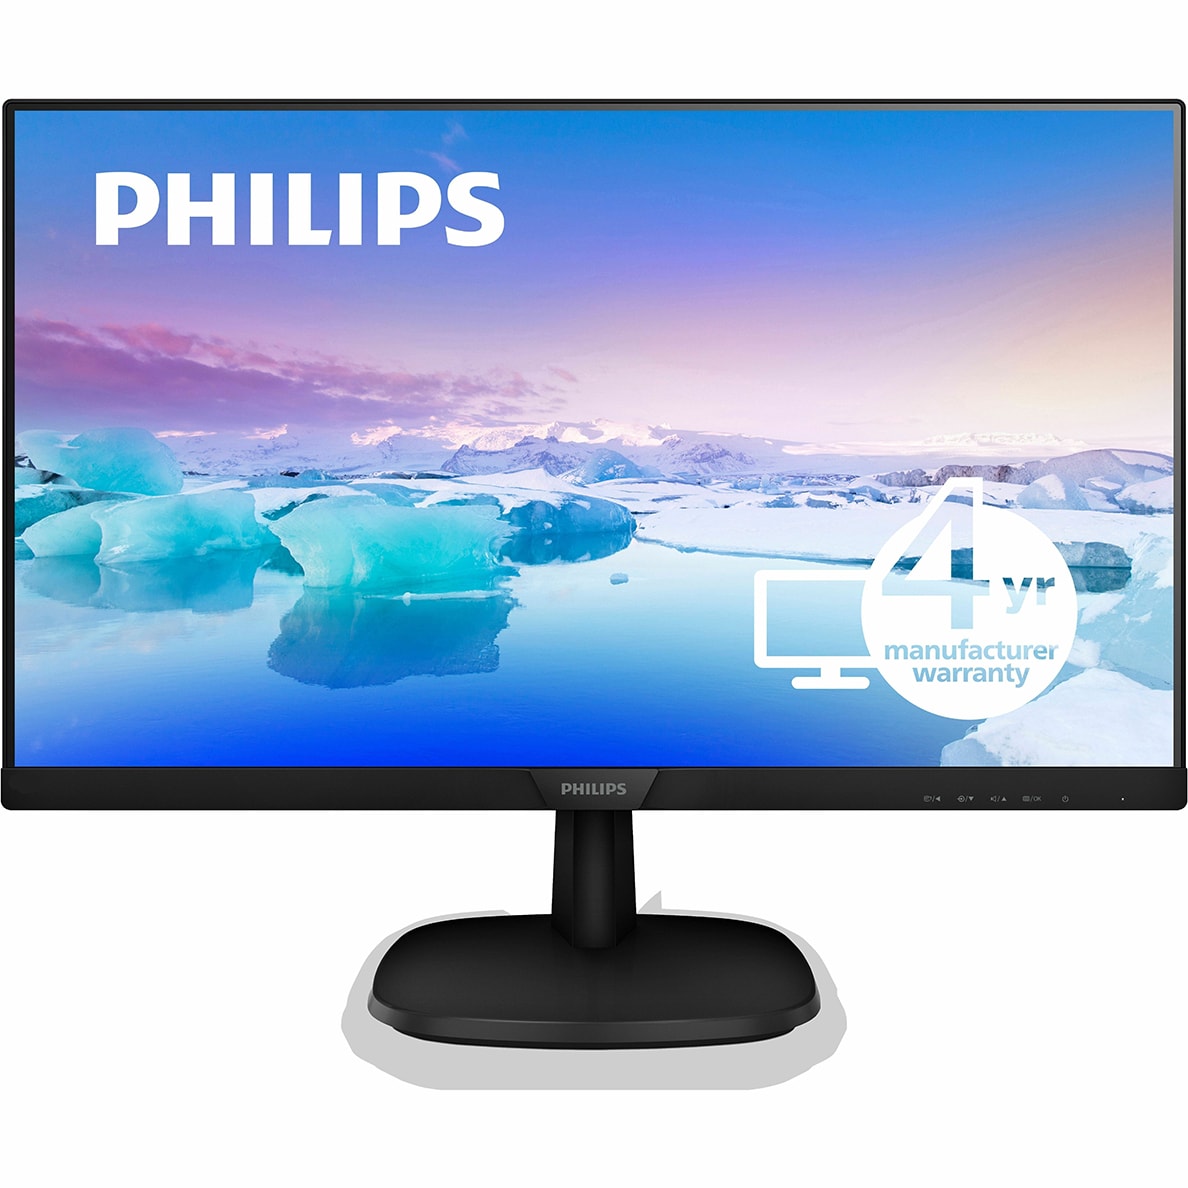 Philips 27" Full HD LED Monitor with 4 Year Warranty